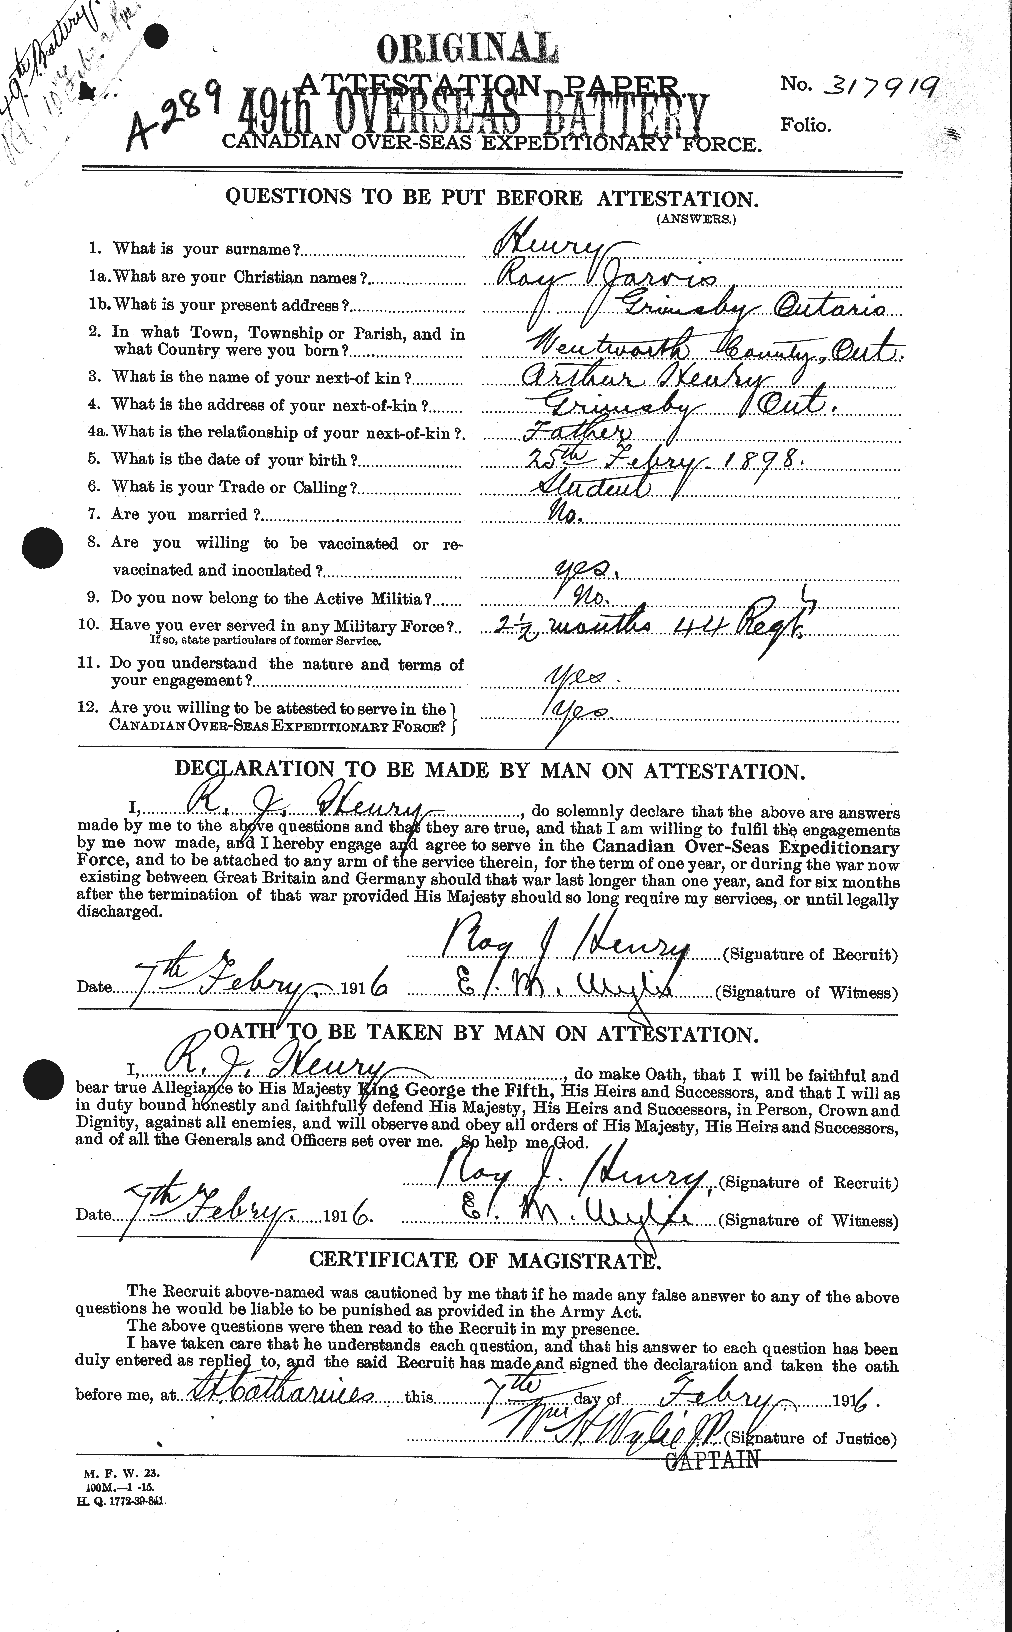 Personnel Records of the First World War - CEF 387721a